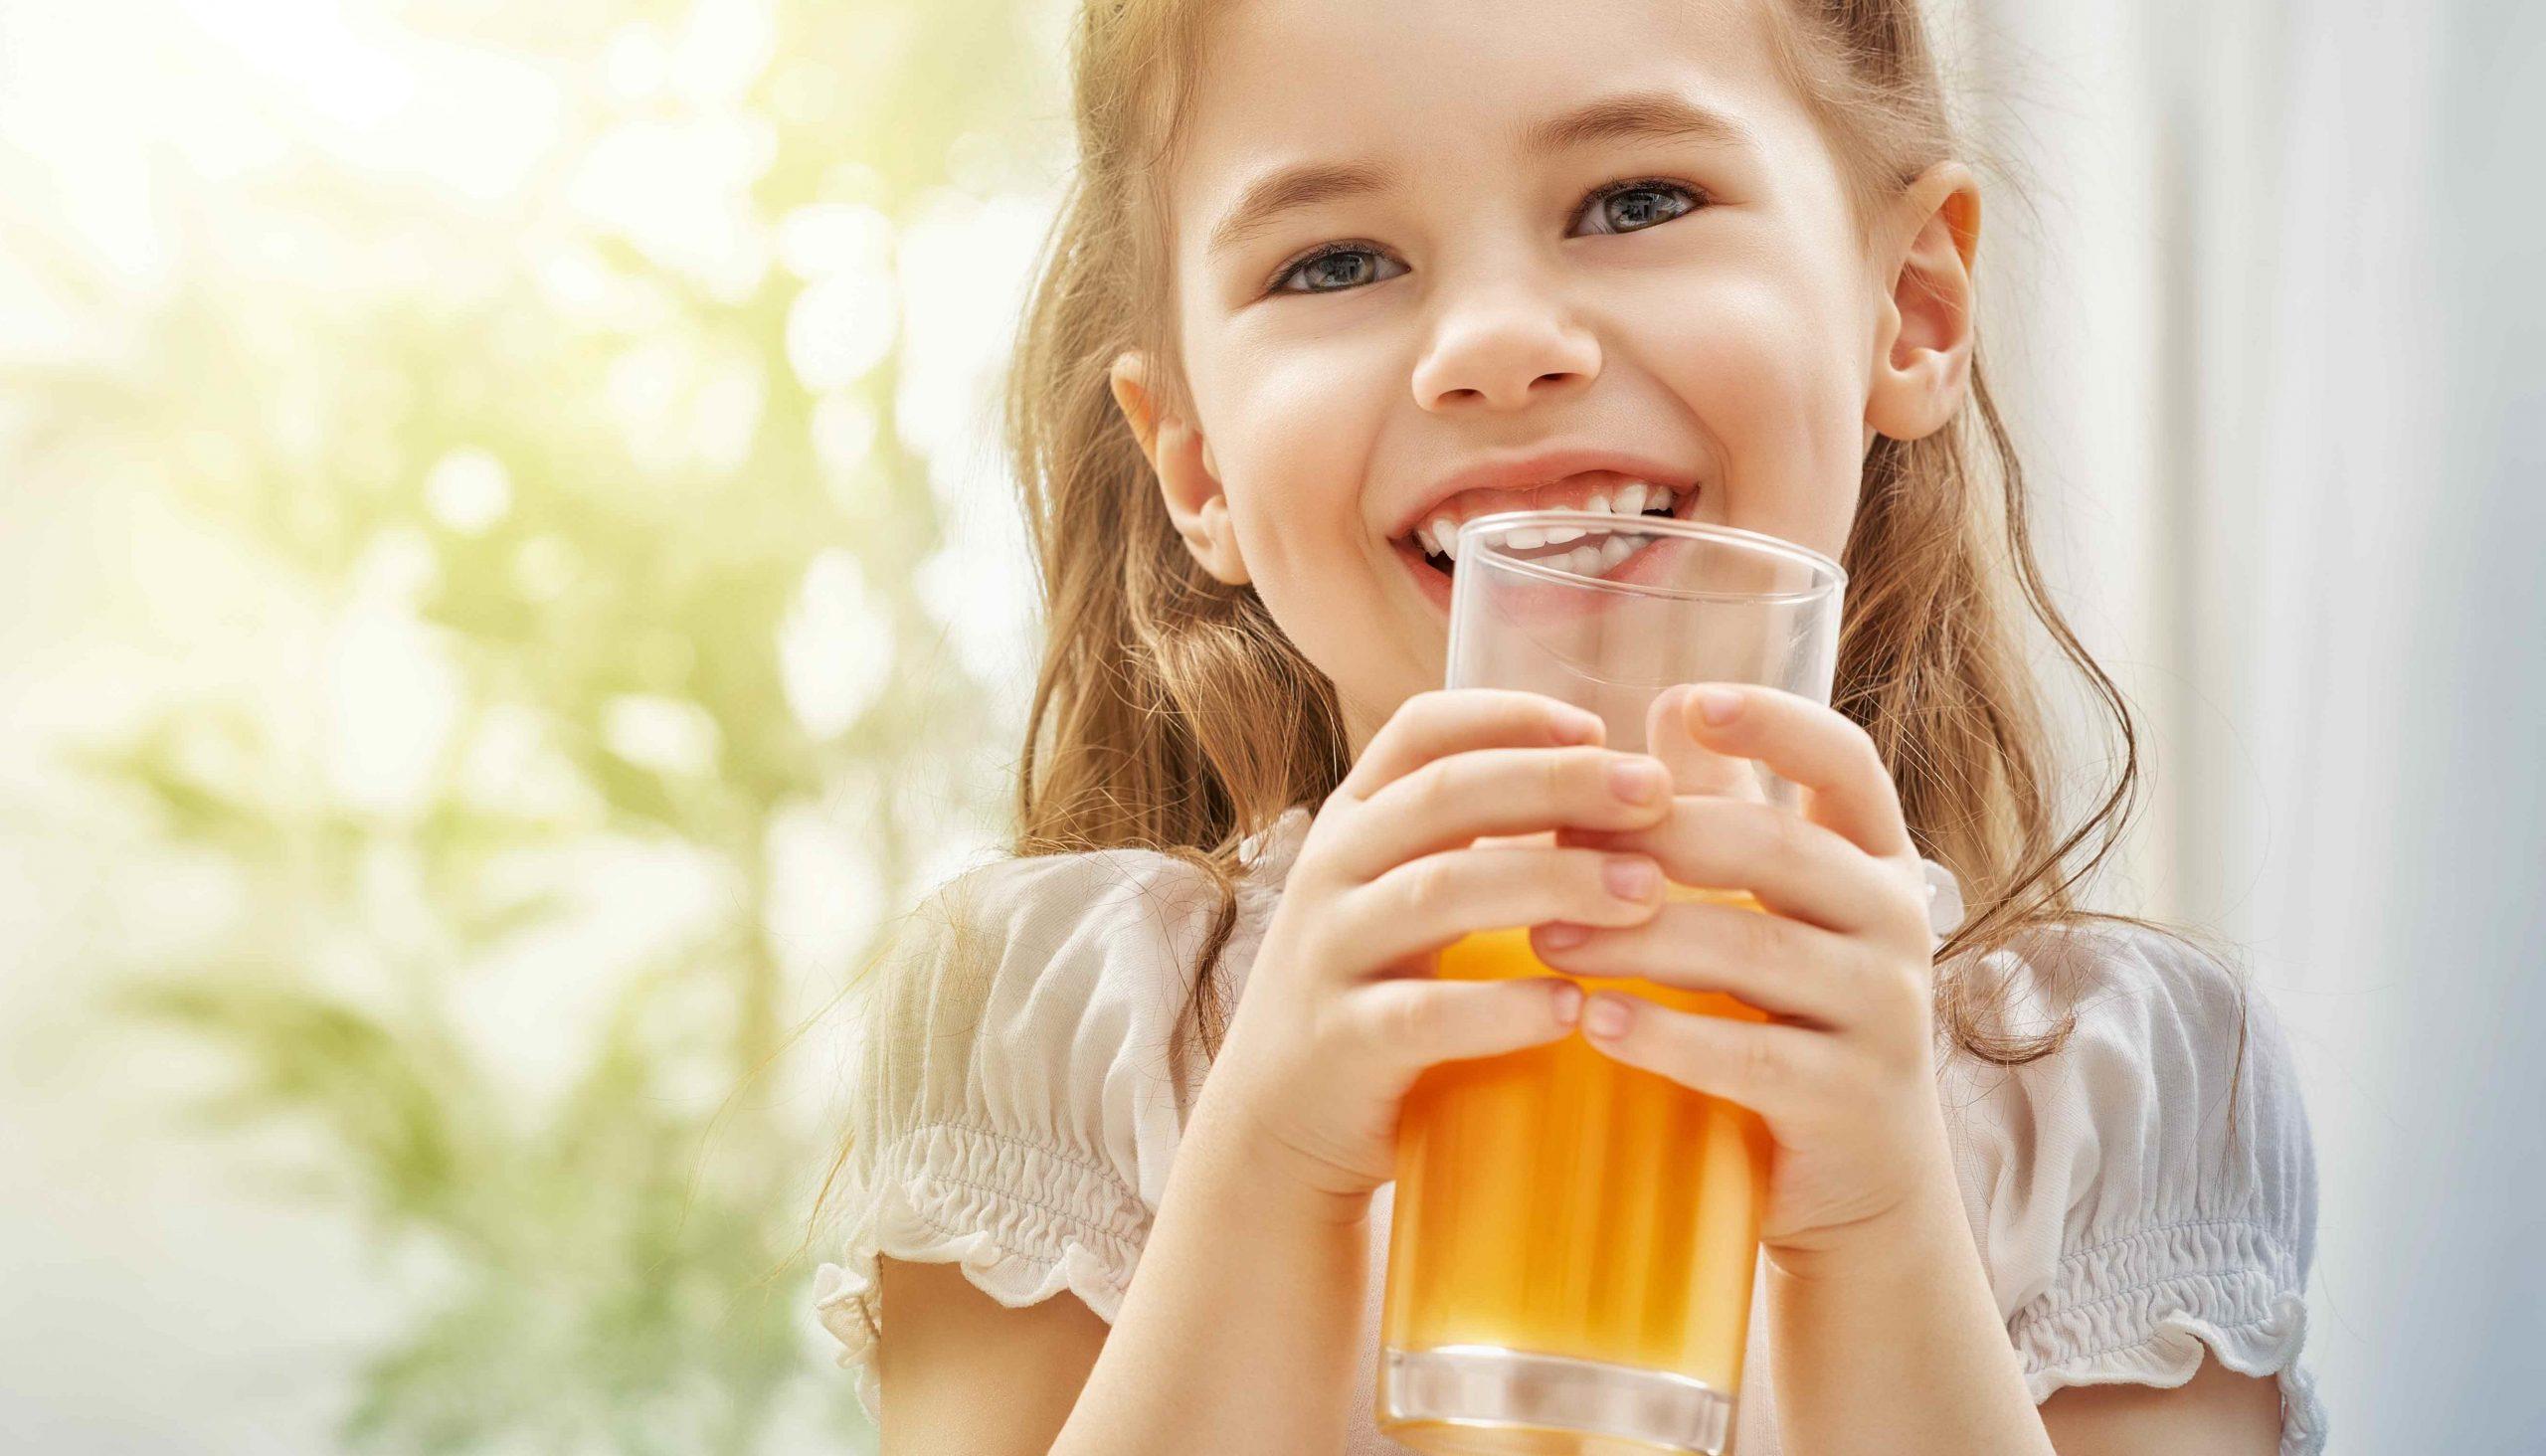 How Juice Went From A Health Food To A Junk Food - Juice manufactures have done an amazing job at positioning fruit juice as a healthy drink for kids and adults. And why wouldn’t it be? It’s 100% fruit juice. It’s all natural. And, we know fruit is healthy. But is it really?